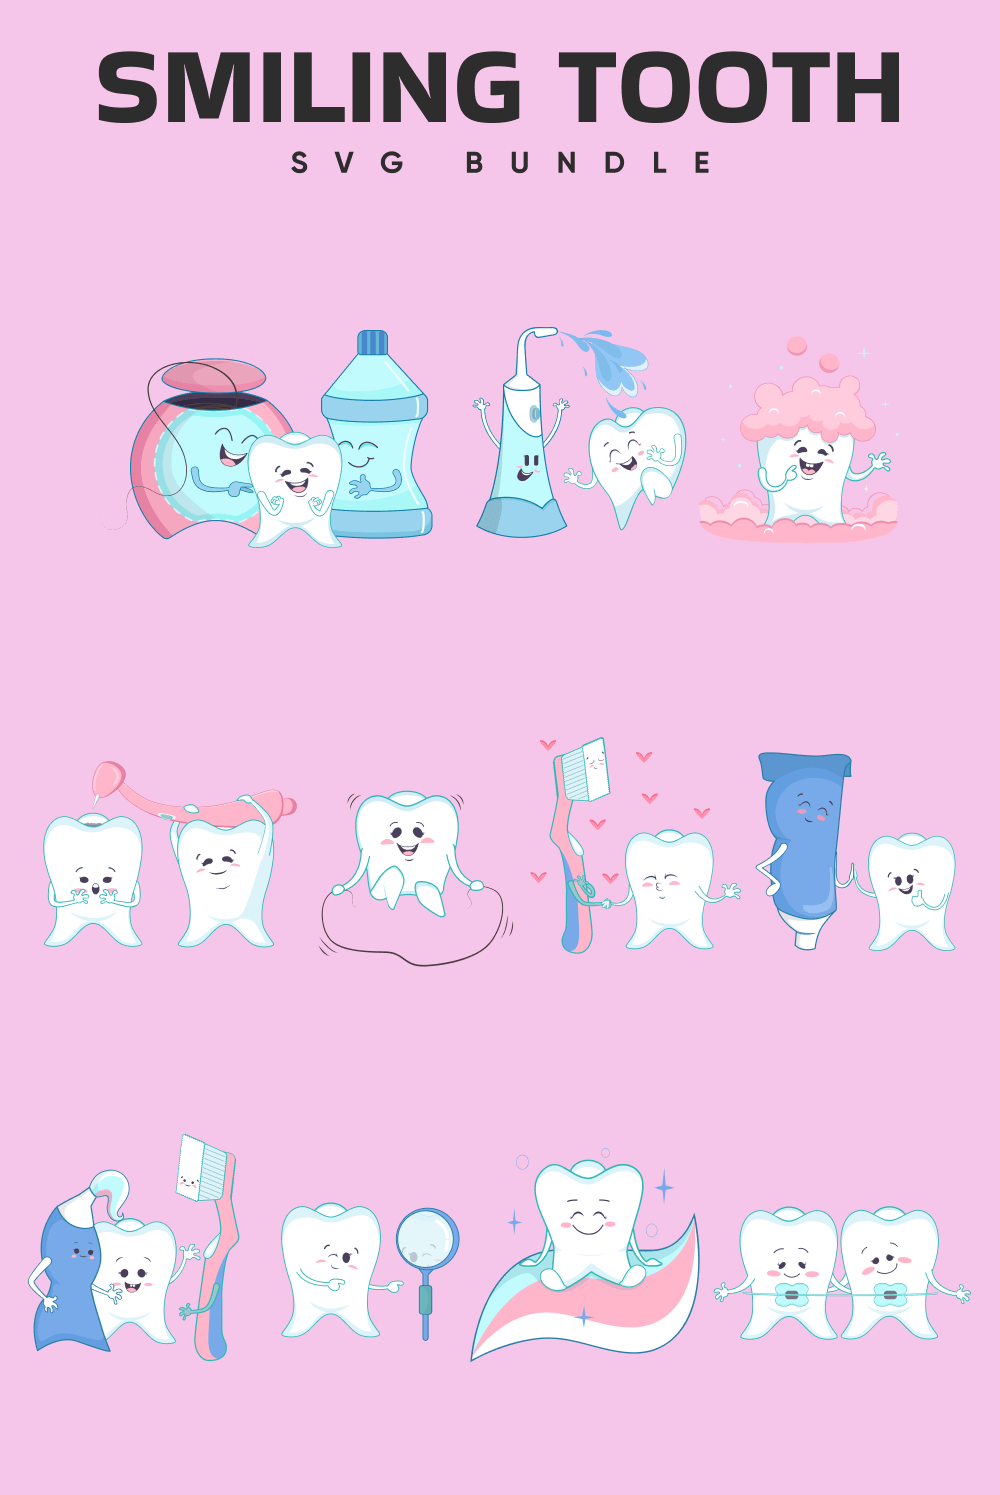 Three rows with smiling teeth with toothpaste and toothbrushes on a pink background with a caption.